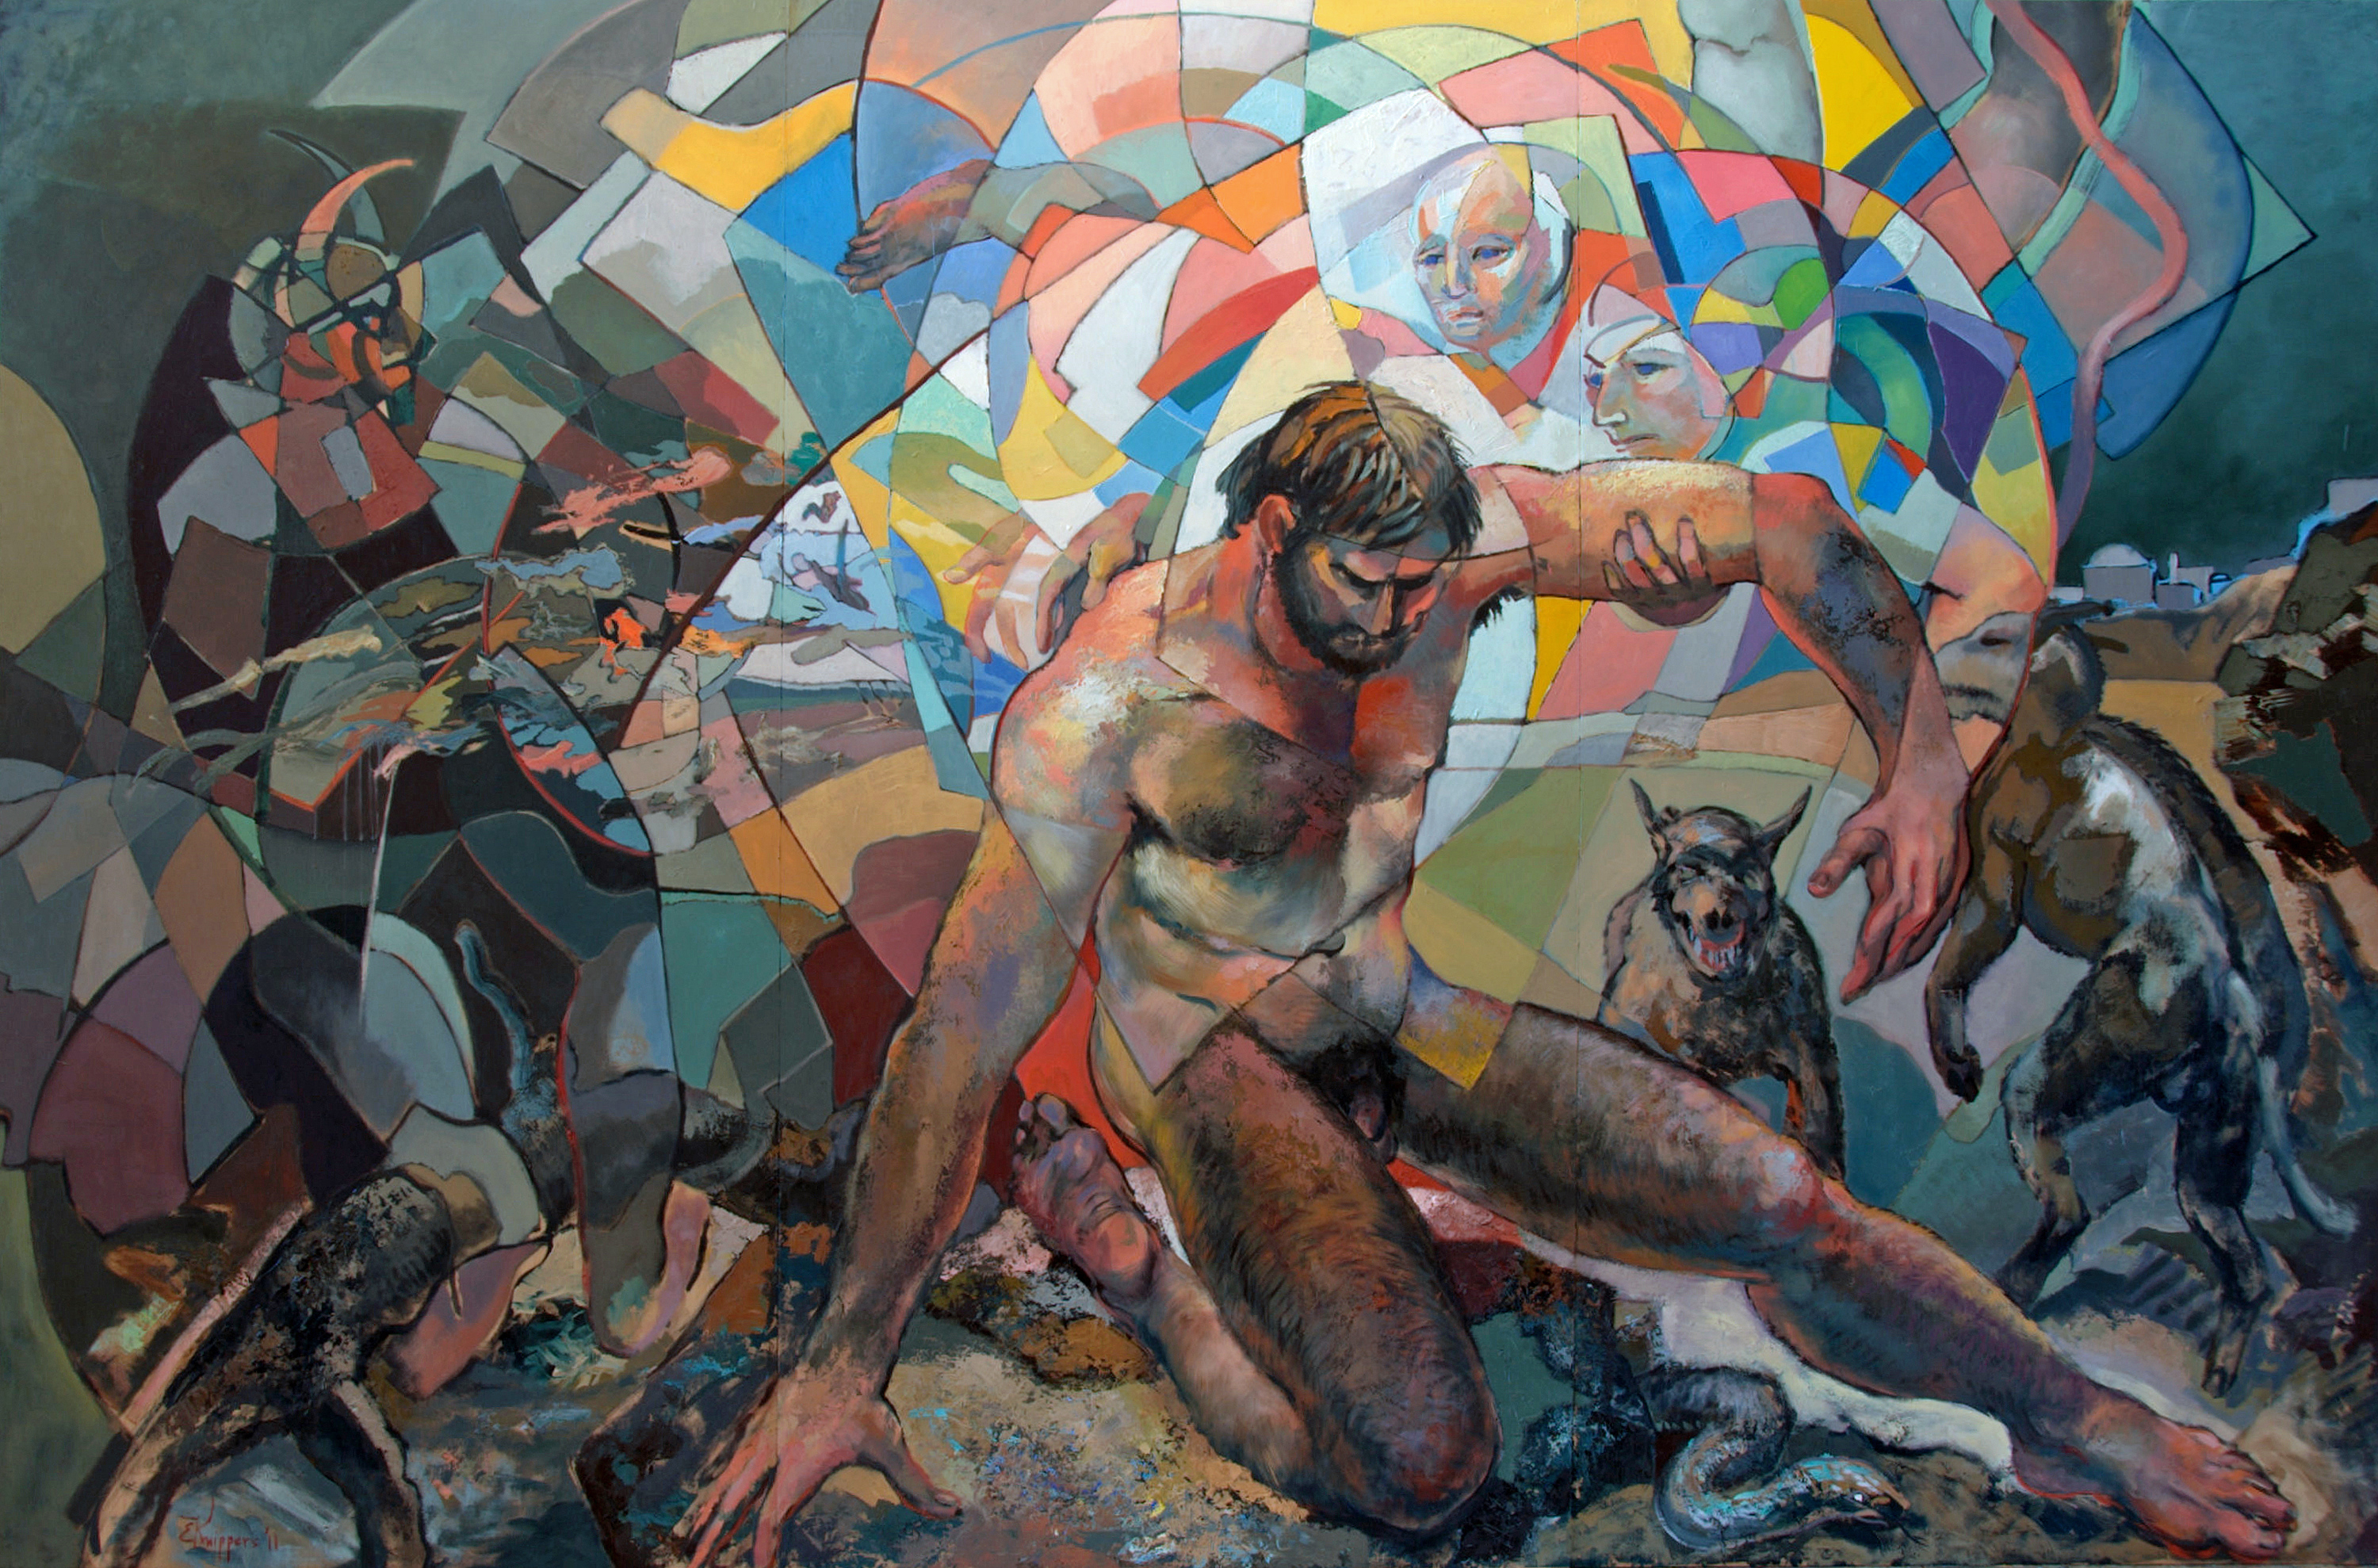 Christ in the Wilderness Oil on panel - 8' X 12' - 2011